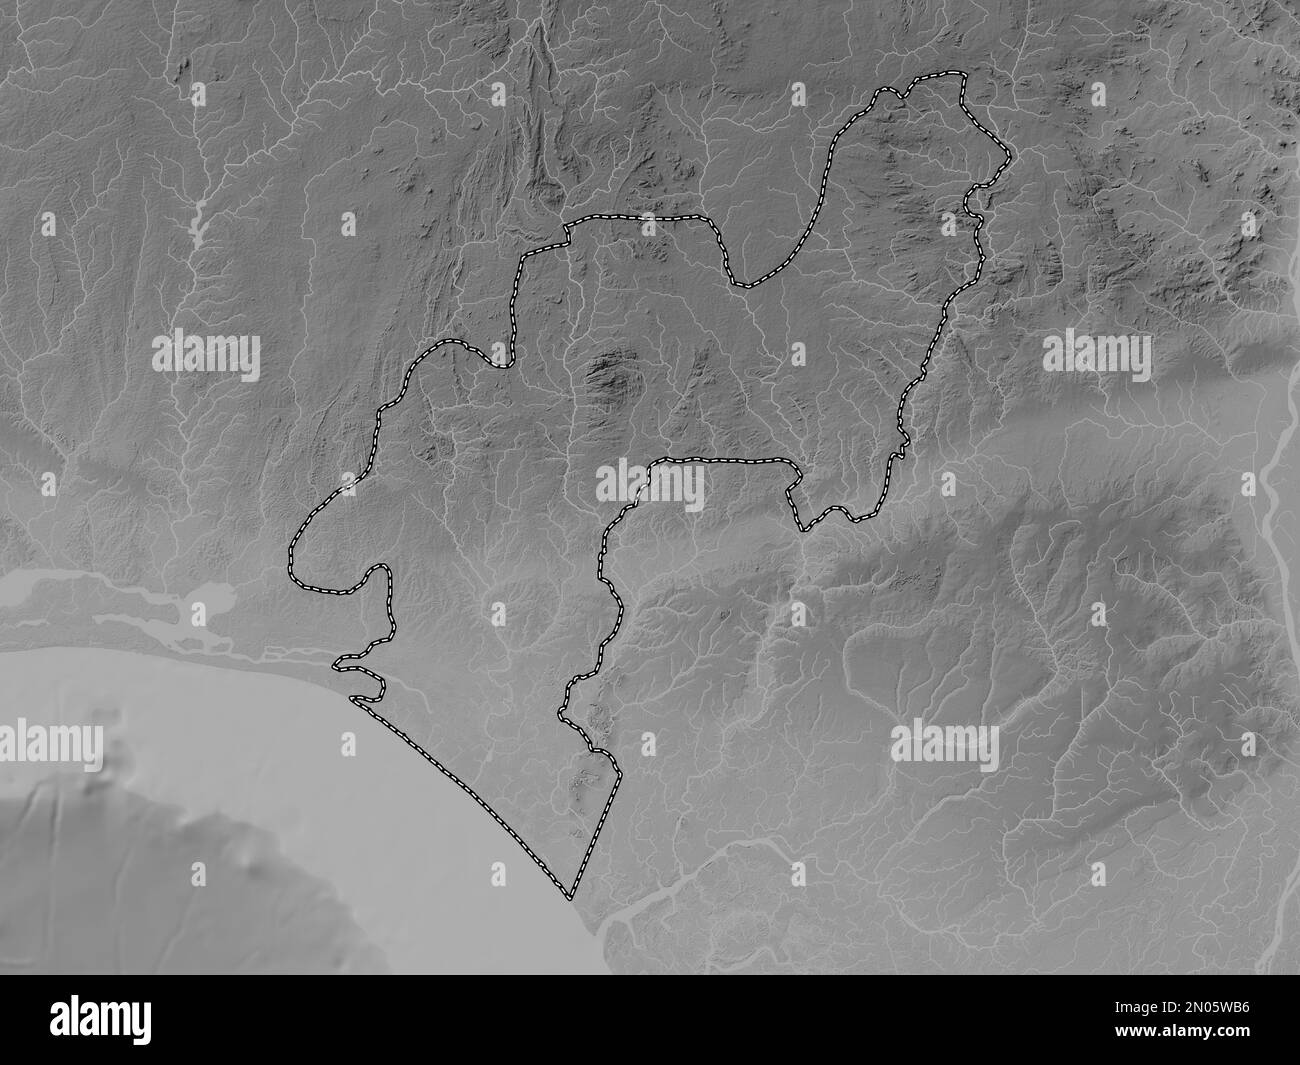 Ondo, state of Nigeria. Grayscale elevation map with lakes and rivers Stock Photo